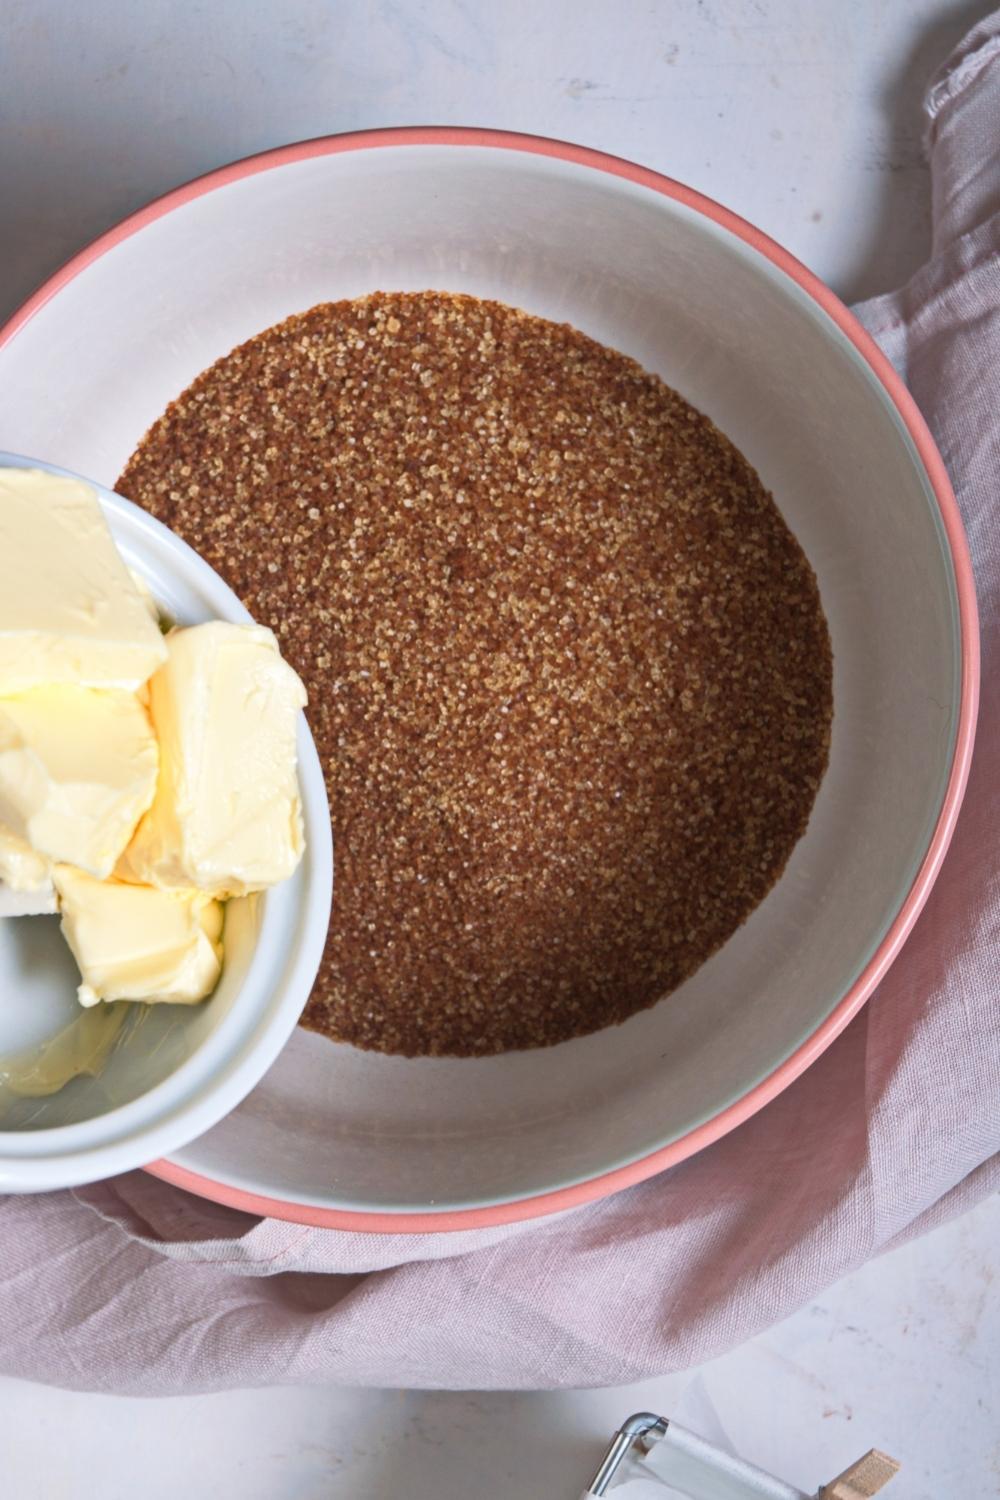 An overhead view of a large bowl containing brown sugar with a smaller bowl containing butter being poured into it.